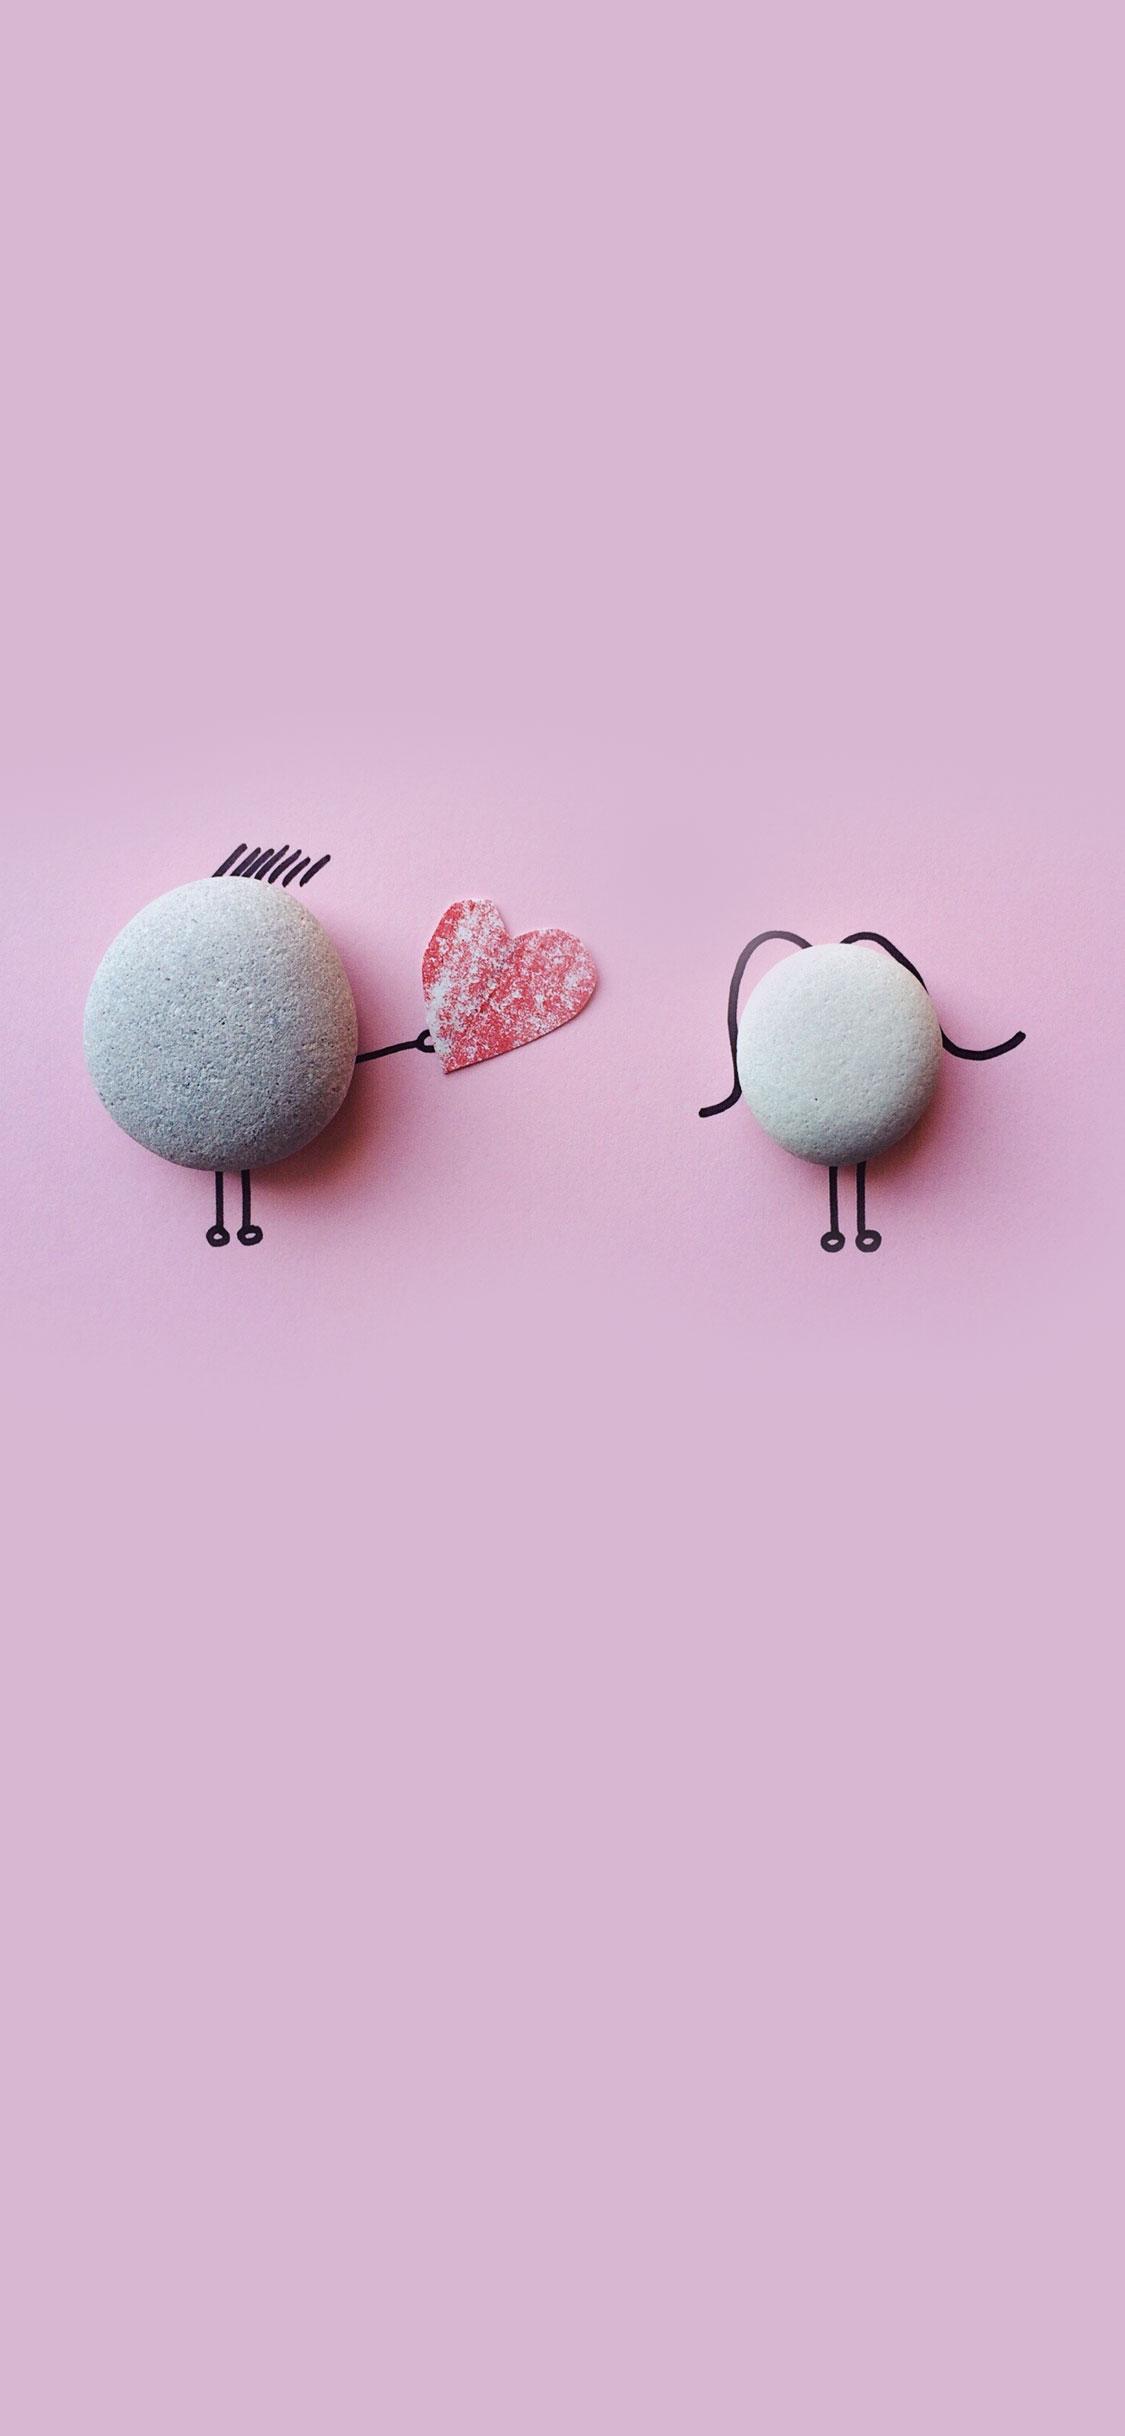 New iPhone X Love Wallpaper / Background For Couples on Valentine's Day